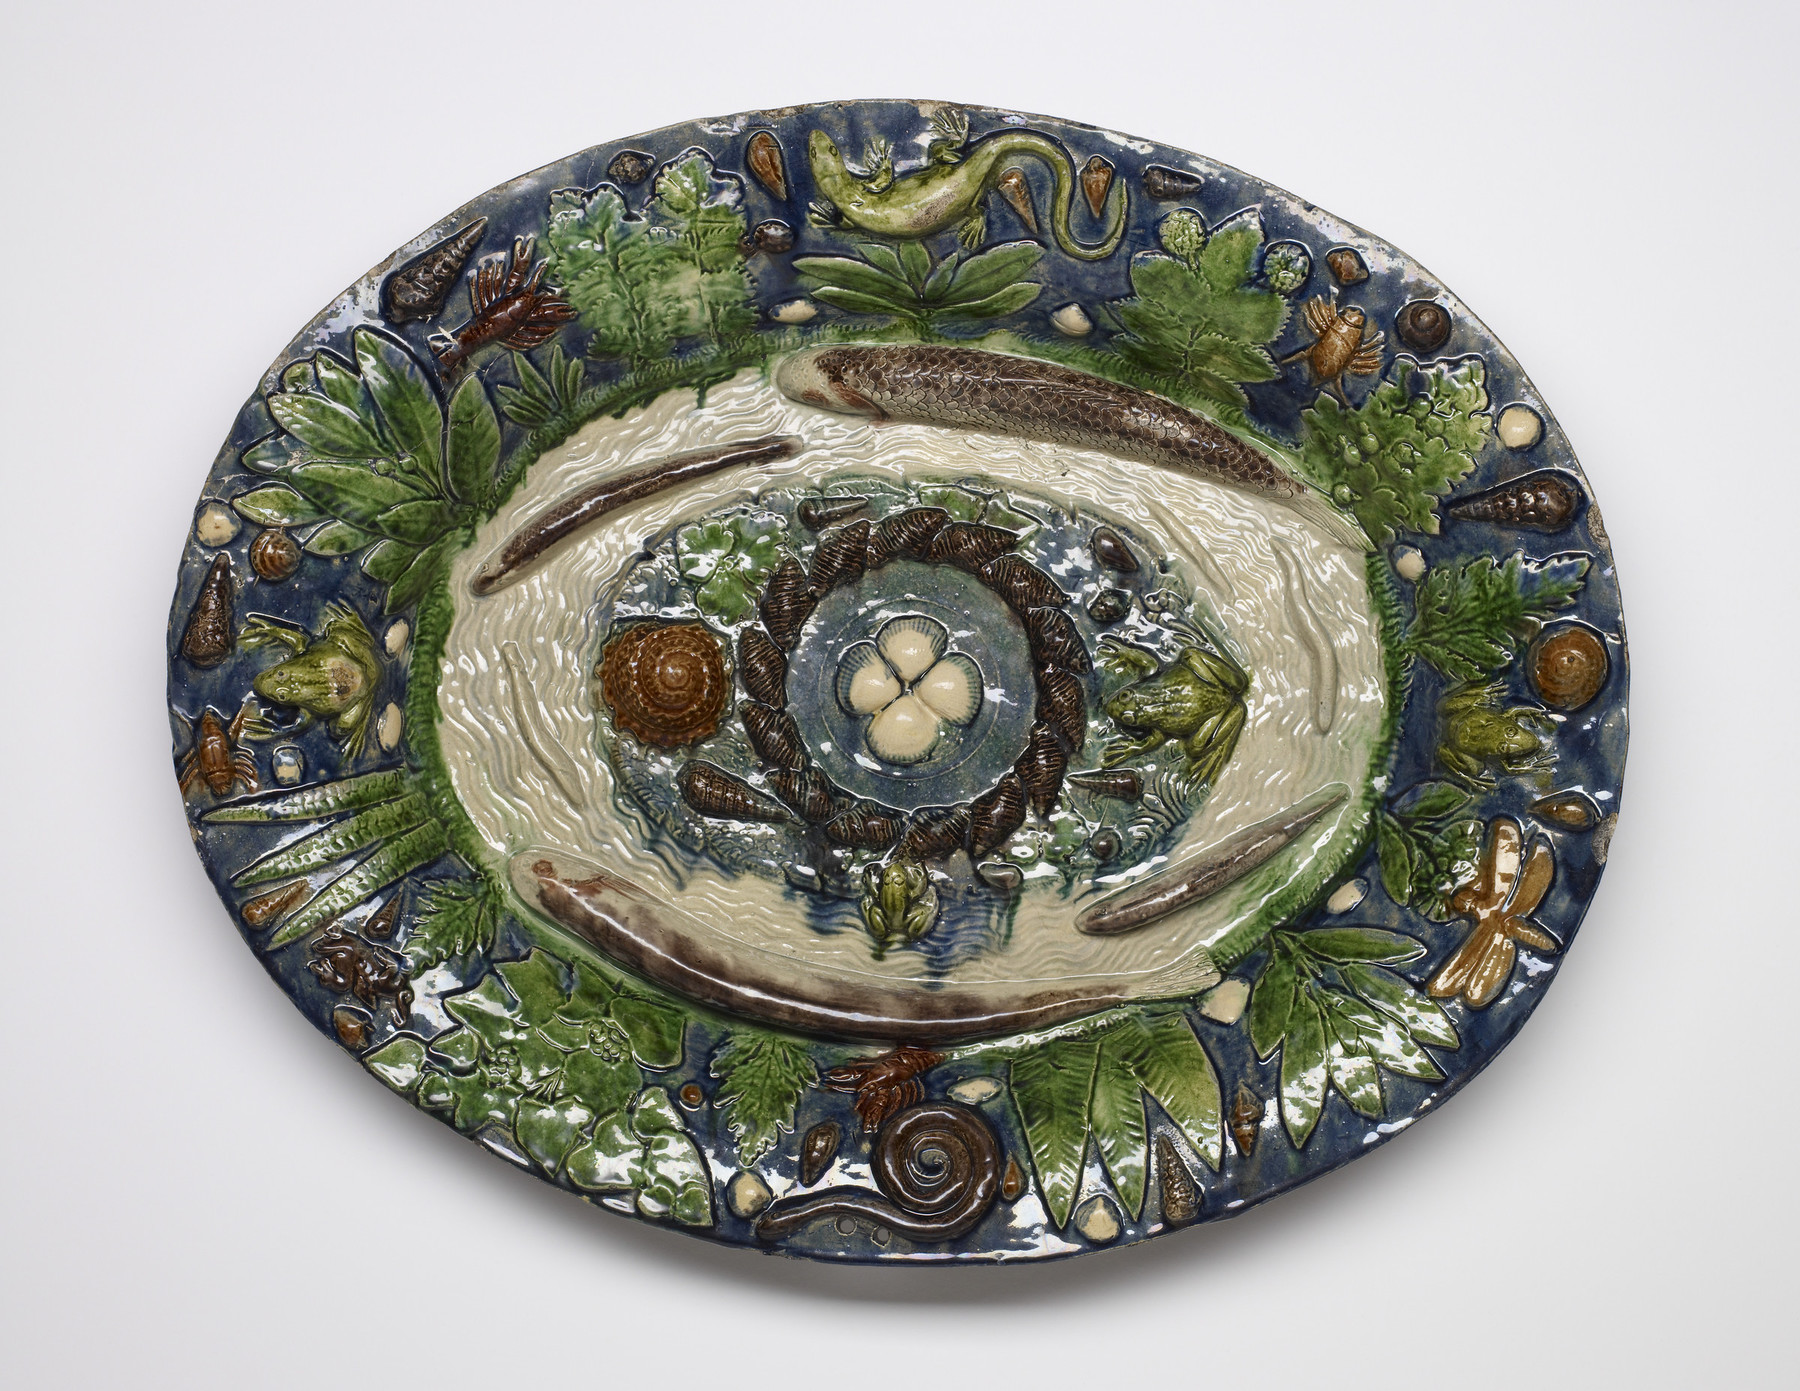 Image for Ornamental Platter with Pond Life